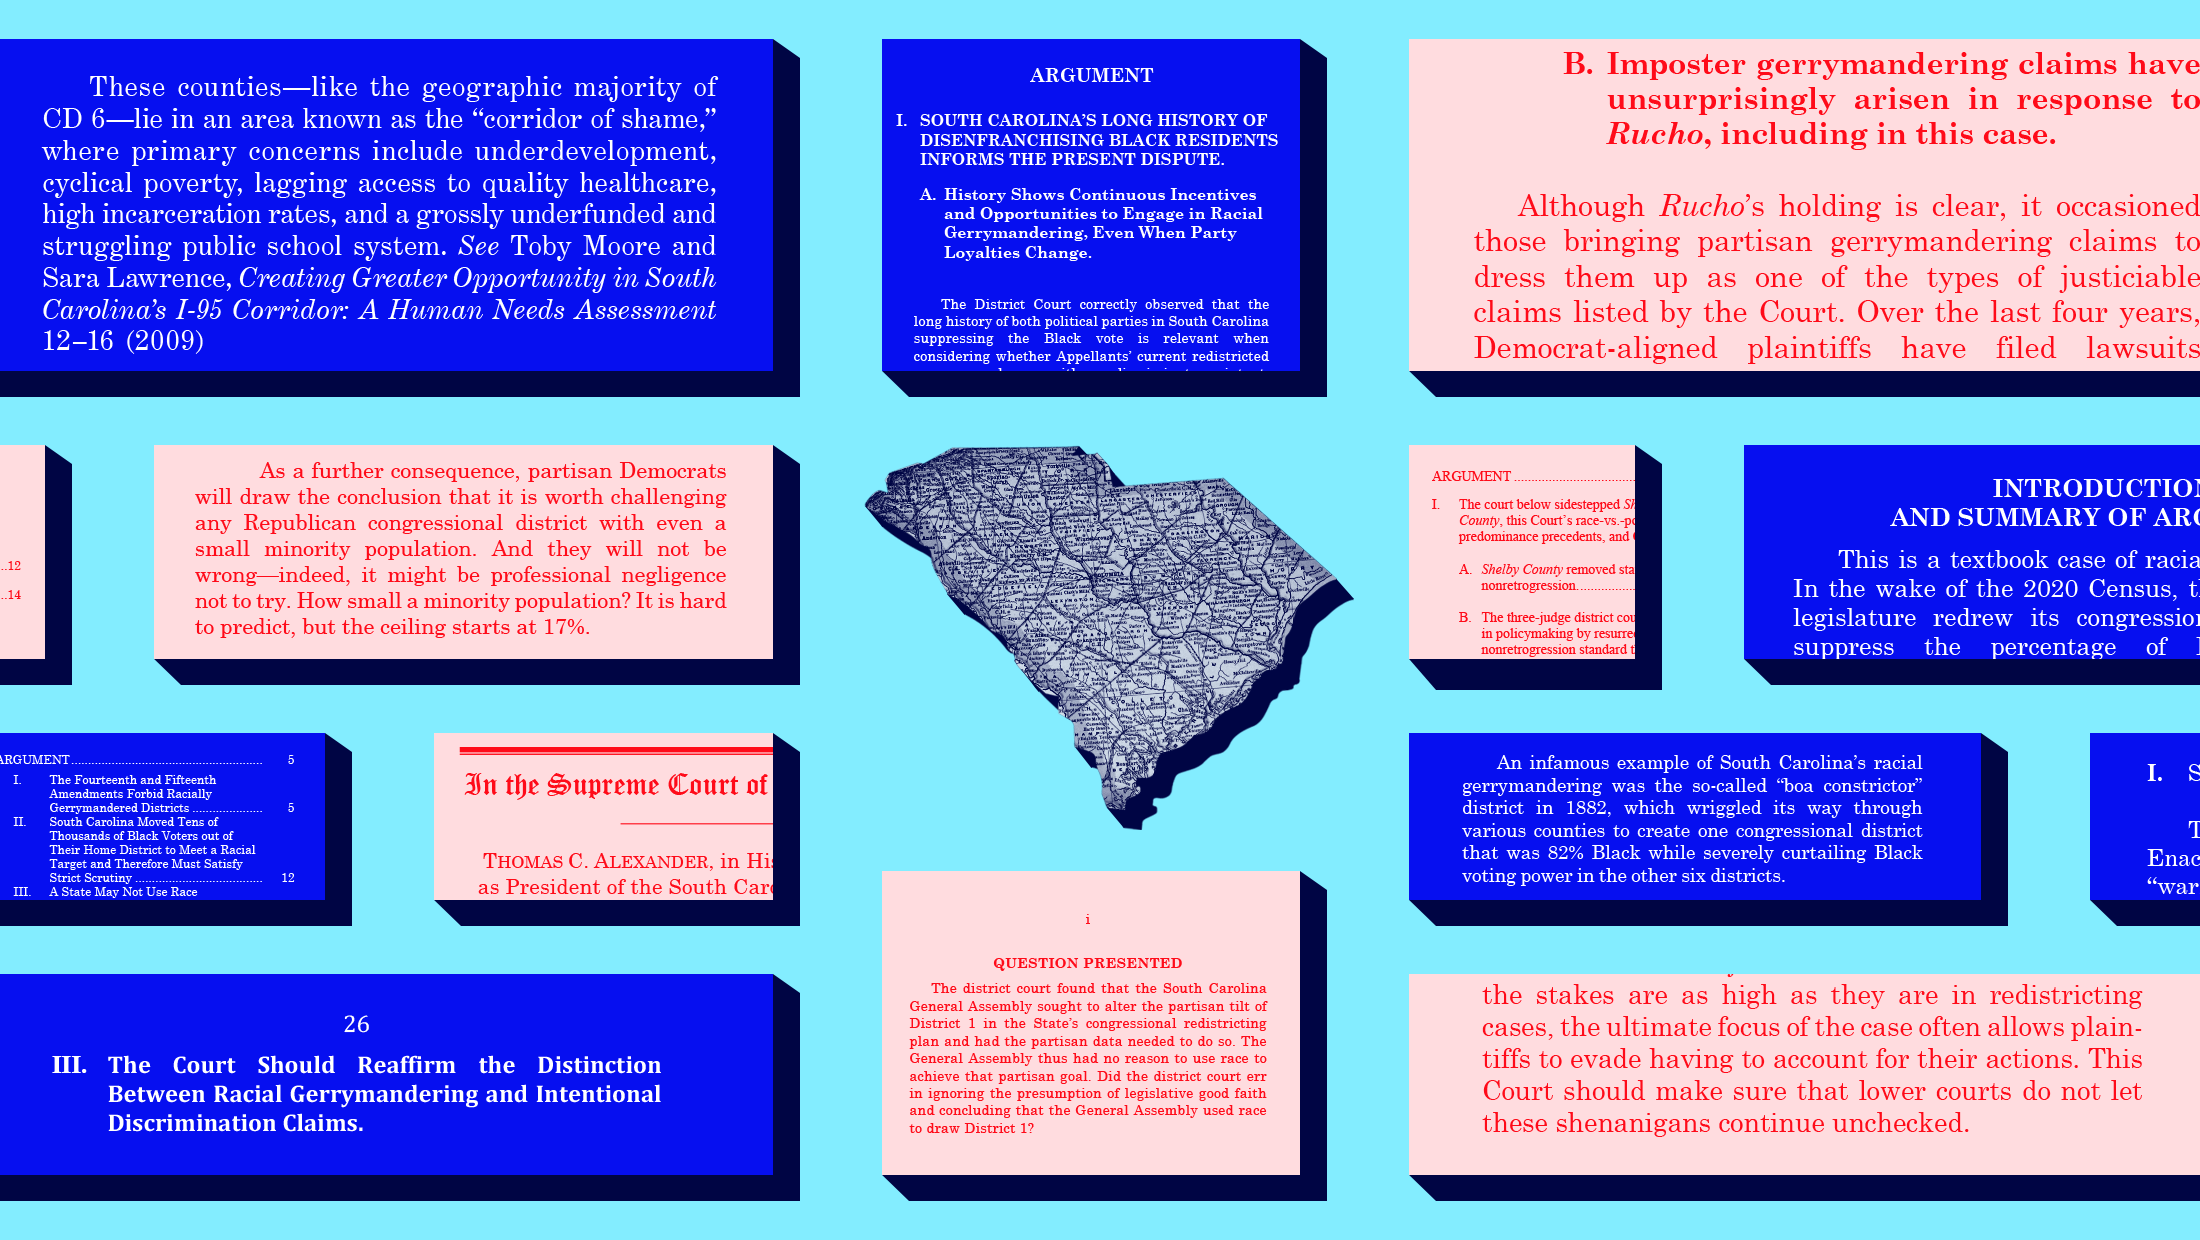 A blue background with a map of South Carolina in the middle surrounded by excerpts from amicus briefs shaded in blue and red.